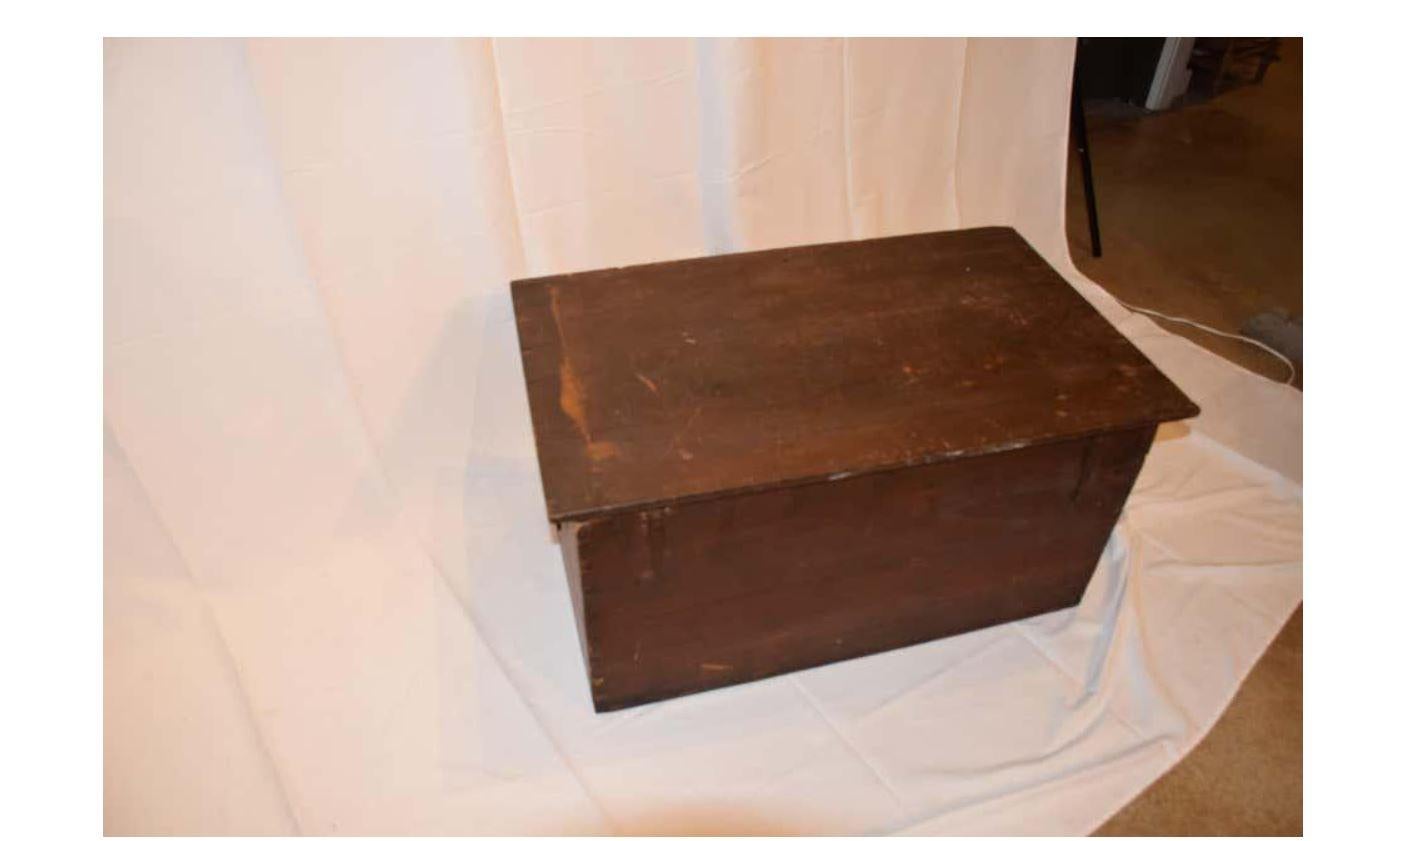 Mid 1800s Trunk with Handmade Hand Forged Iron Handles In Good Condition For Sale In Burton, TX